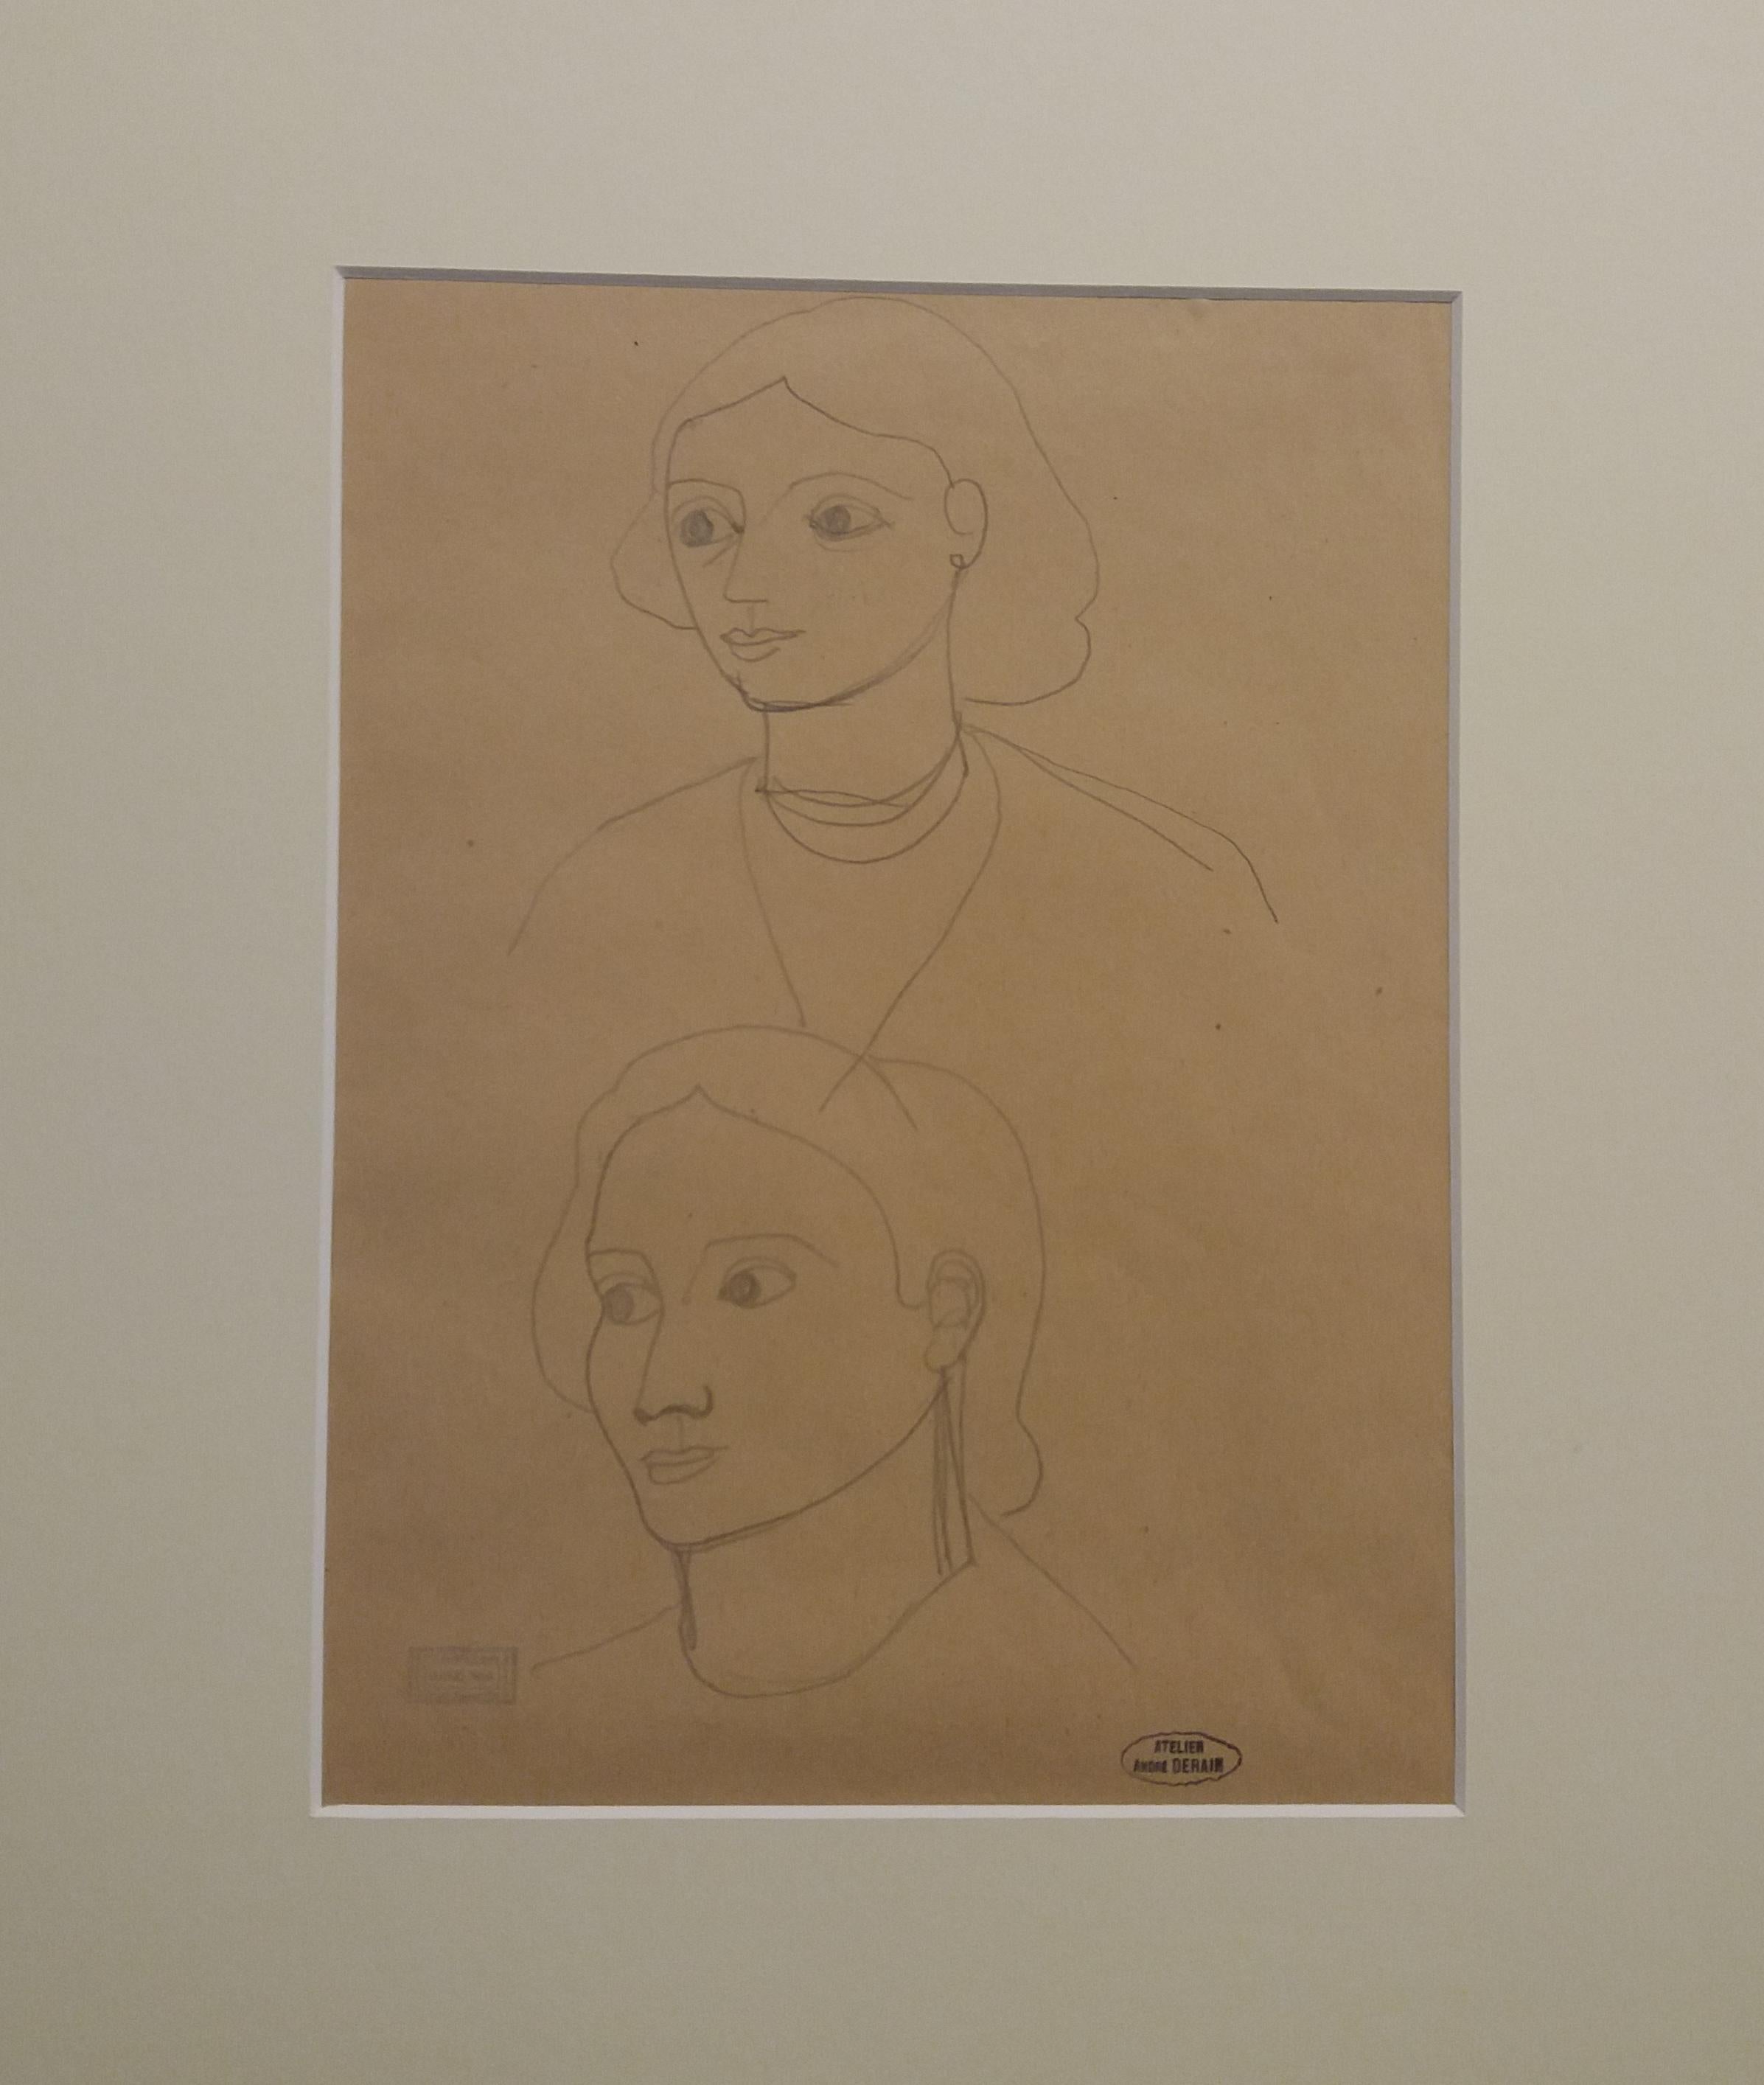  profile face. original pencil drawing painting
André Derain (Chatou, June 10, 1880-Garches, September 8, 1954) was a French painter, illustrator and set designer, representative of Fauvism.

Derain was eighteen years old when he entered the